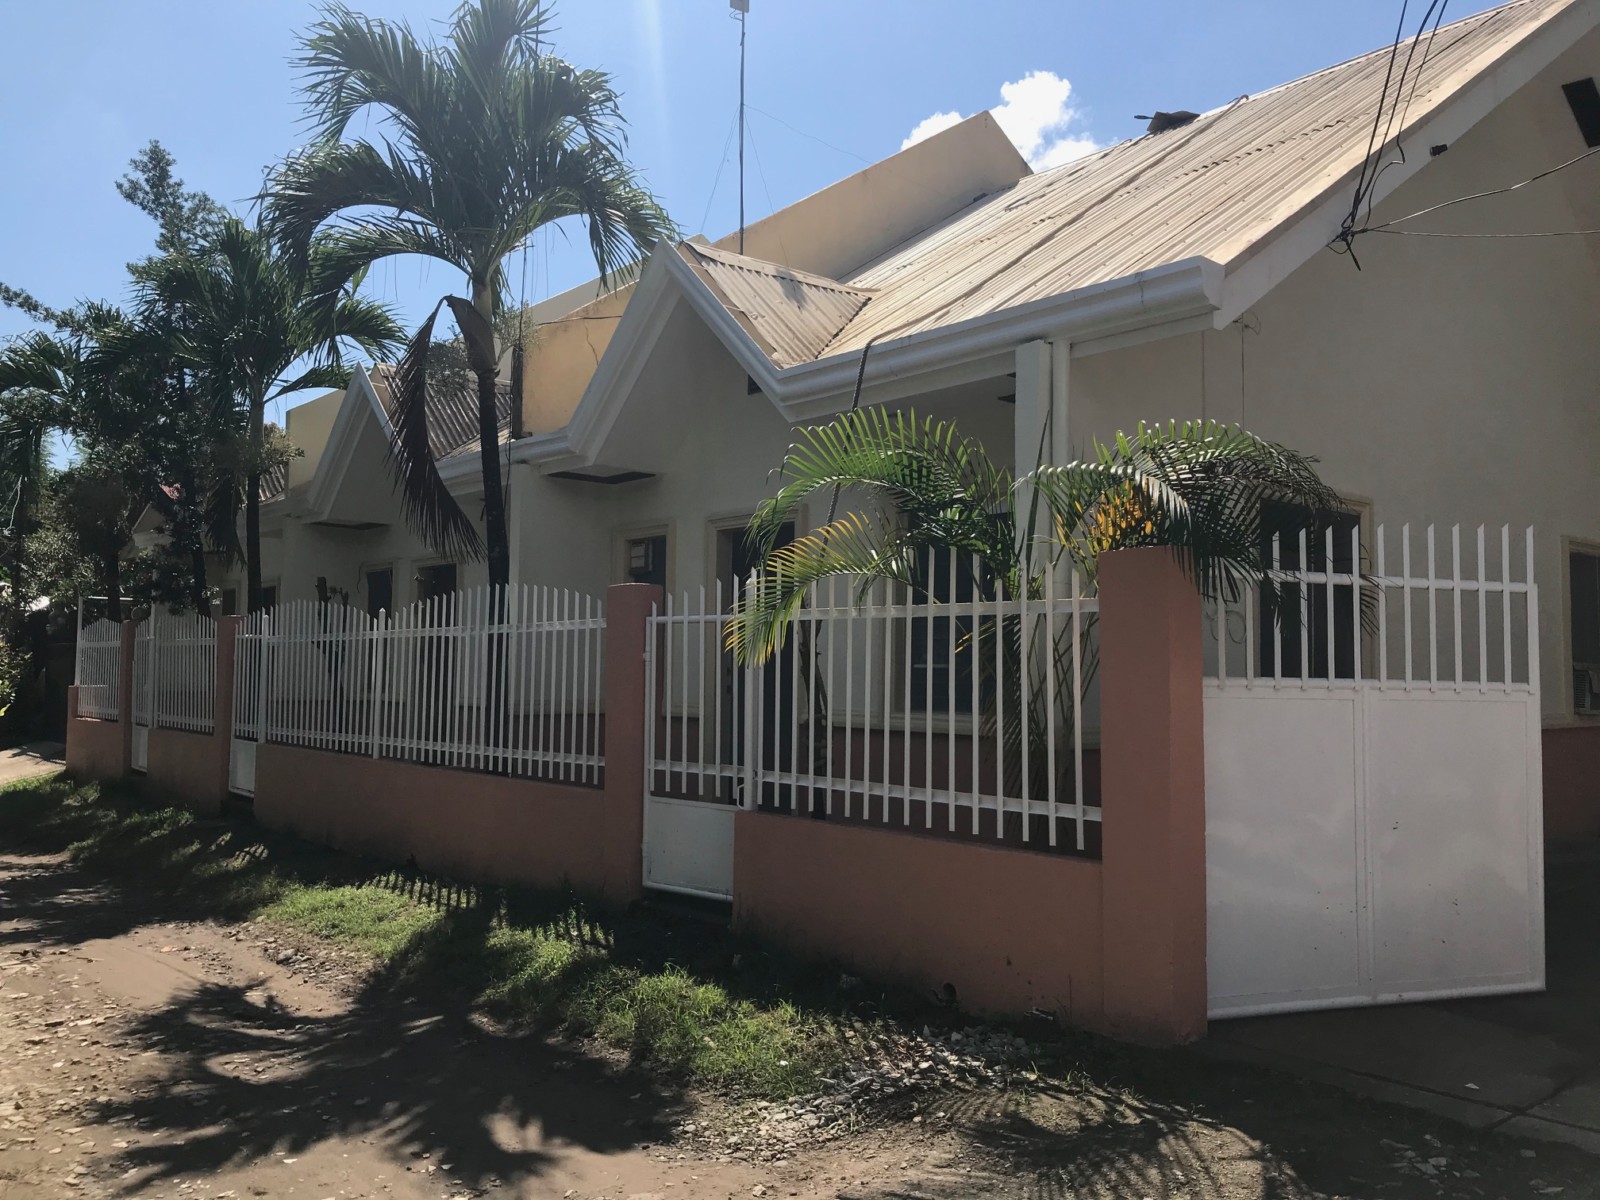 Apartment Building For Sale In Dumaguete – ID#14701